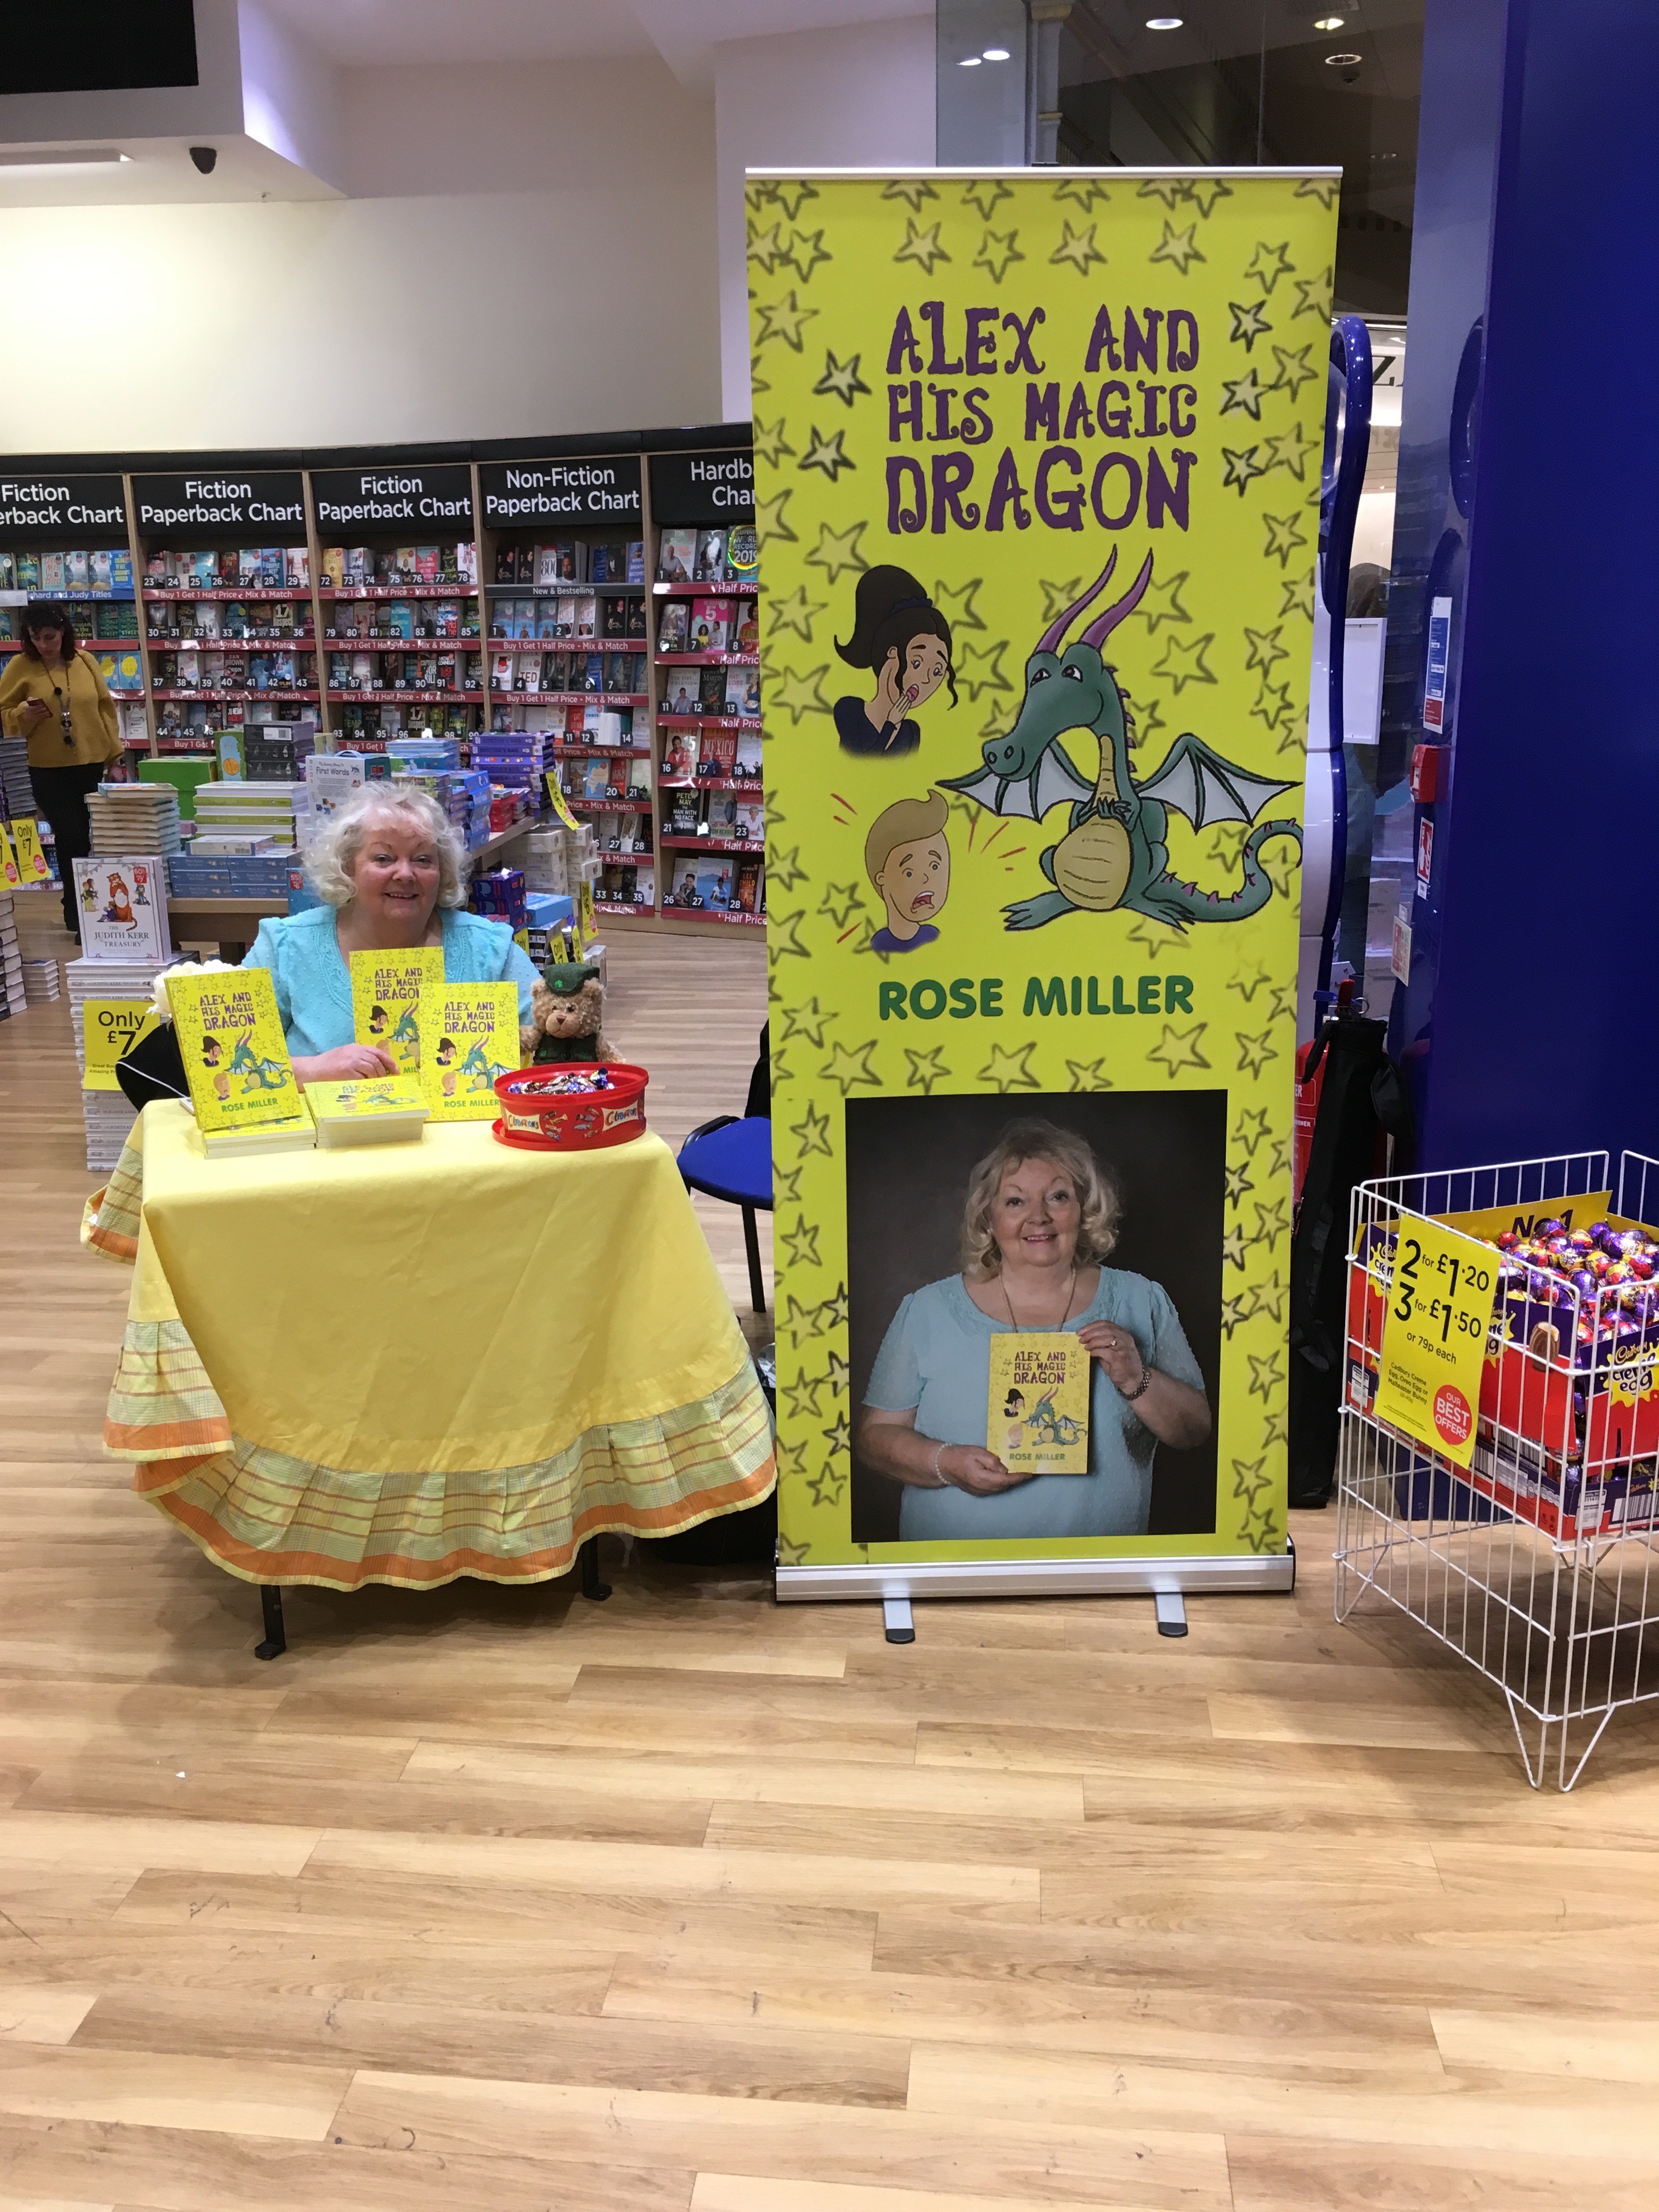 Readers in Manchester got the Signed Copies of ‘Alex and his Magic Dragon’ by Rose Miller 